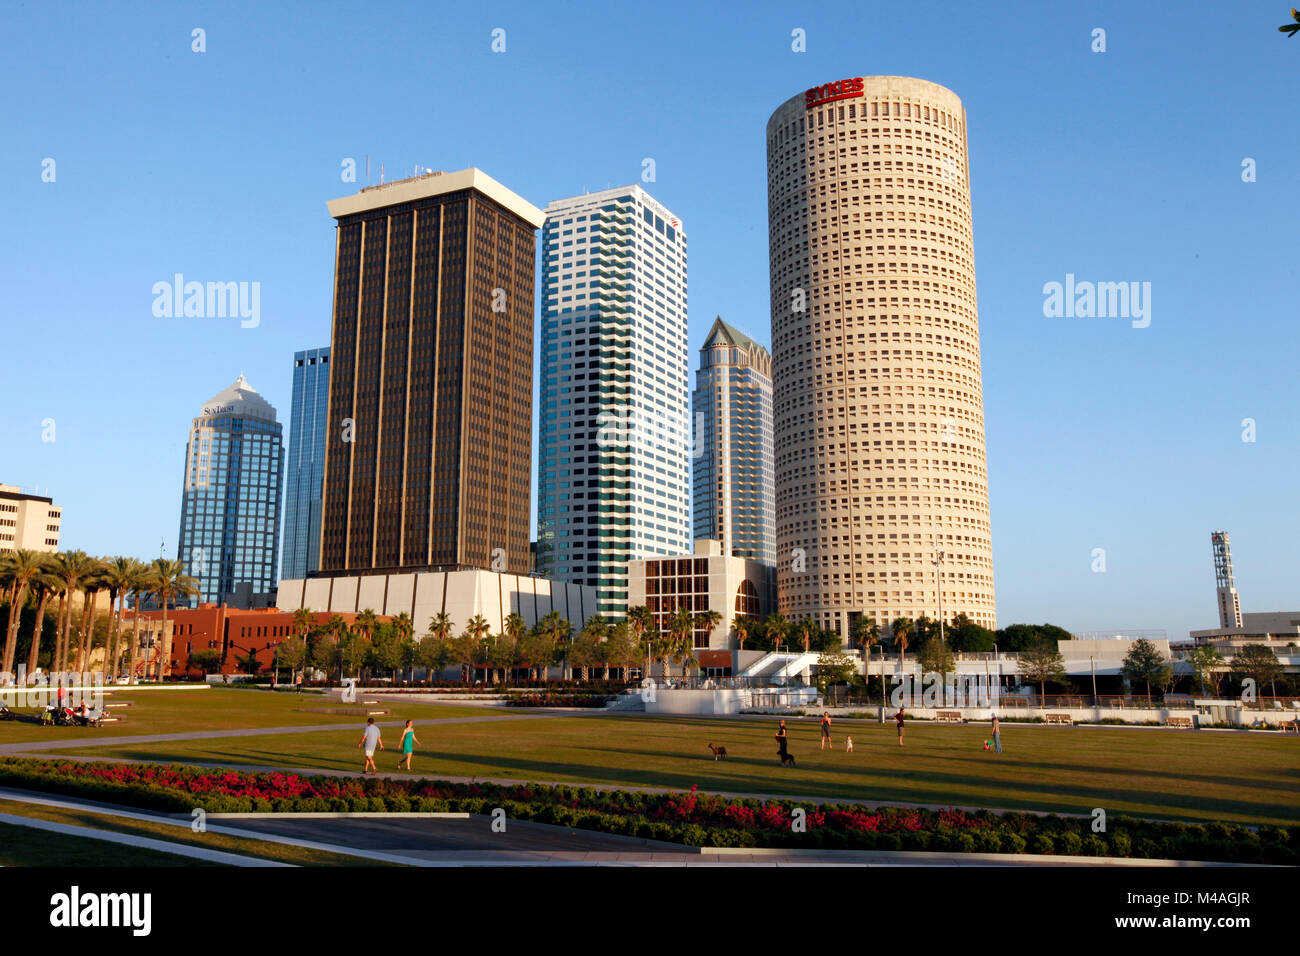 Tampa's Curtis Hixon Park provides a great lawn with views of the city's skyline and the Riverwalk. Stock Photo